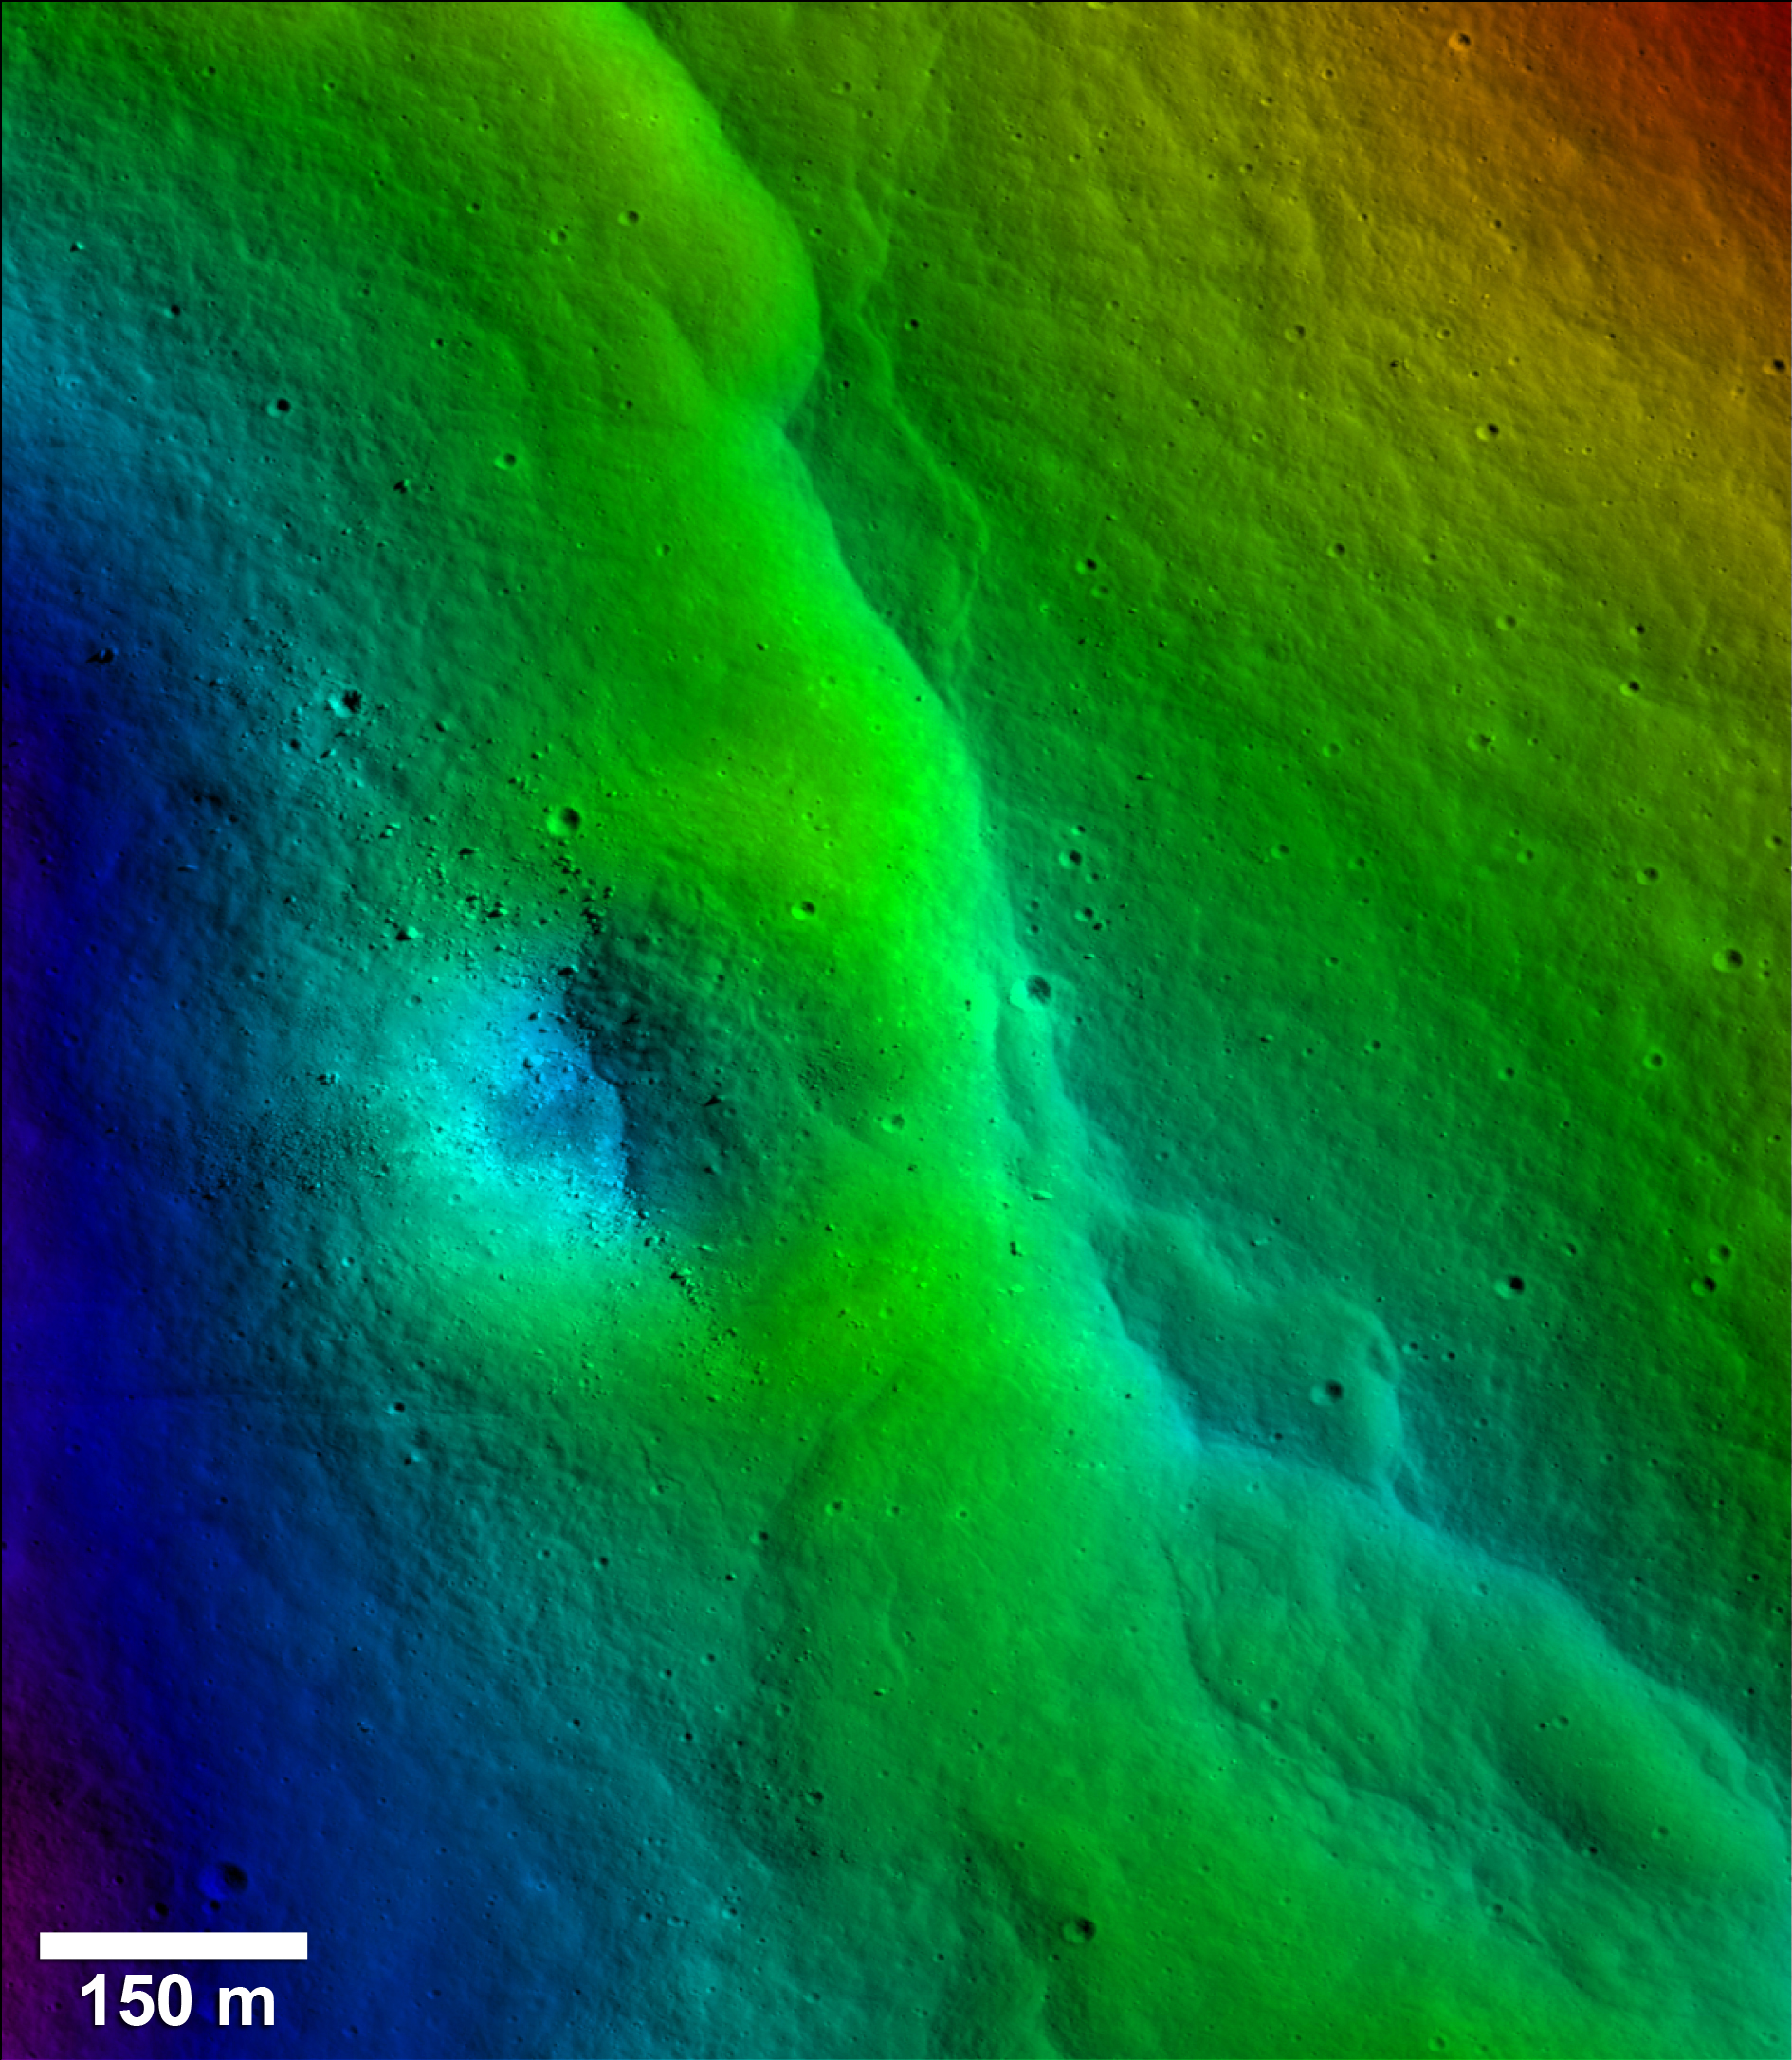  Lunar Reconnaissance Orbiter Camera images (LROC) revealed thousands of lobate fault scarps on the moon, including this prominent one in the Vitello Cluster. Image released Sept. 15, 2015.